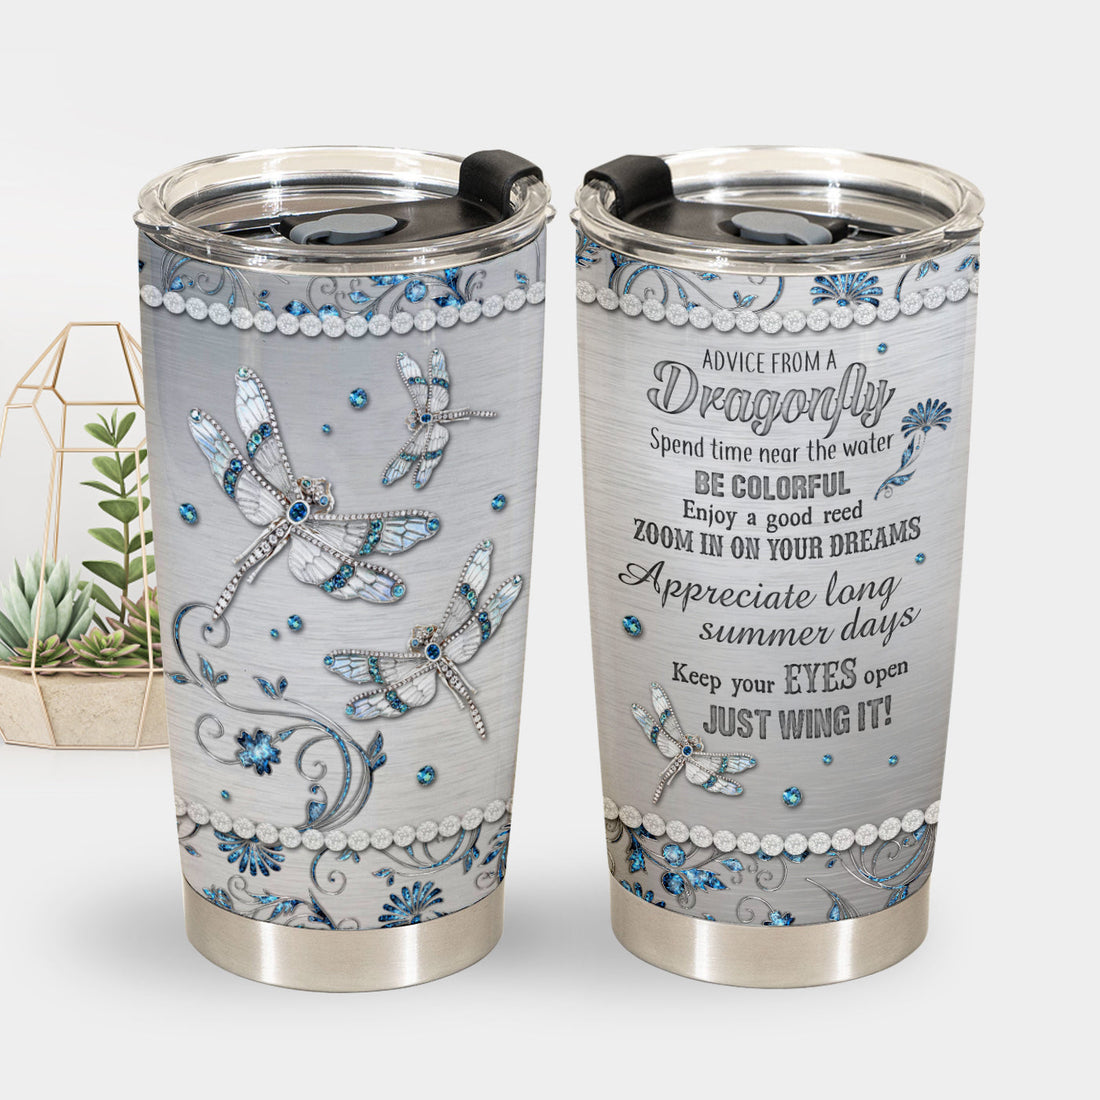 Best Custom Dragonfly Gift for Women - Boho Gifts for Women With Positive Inspirational Quote - Motivational, Religious, Spiritual, Inspirational 20oz Stainless Steel Tumbler Gifts for Women + 1658995724147.jpg